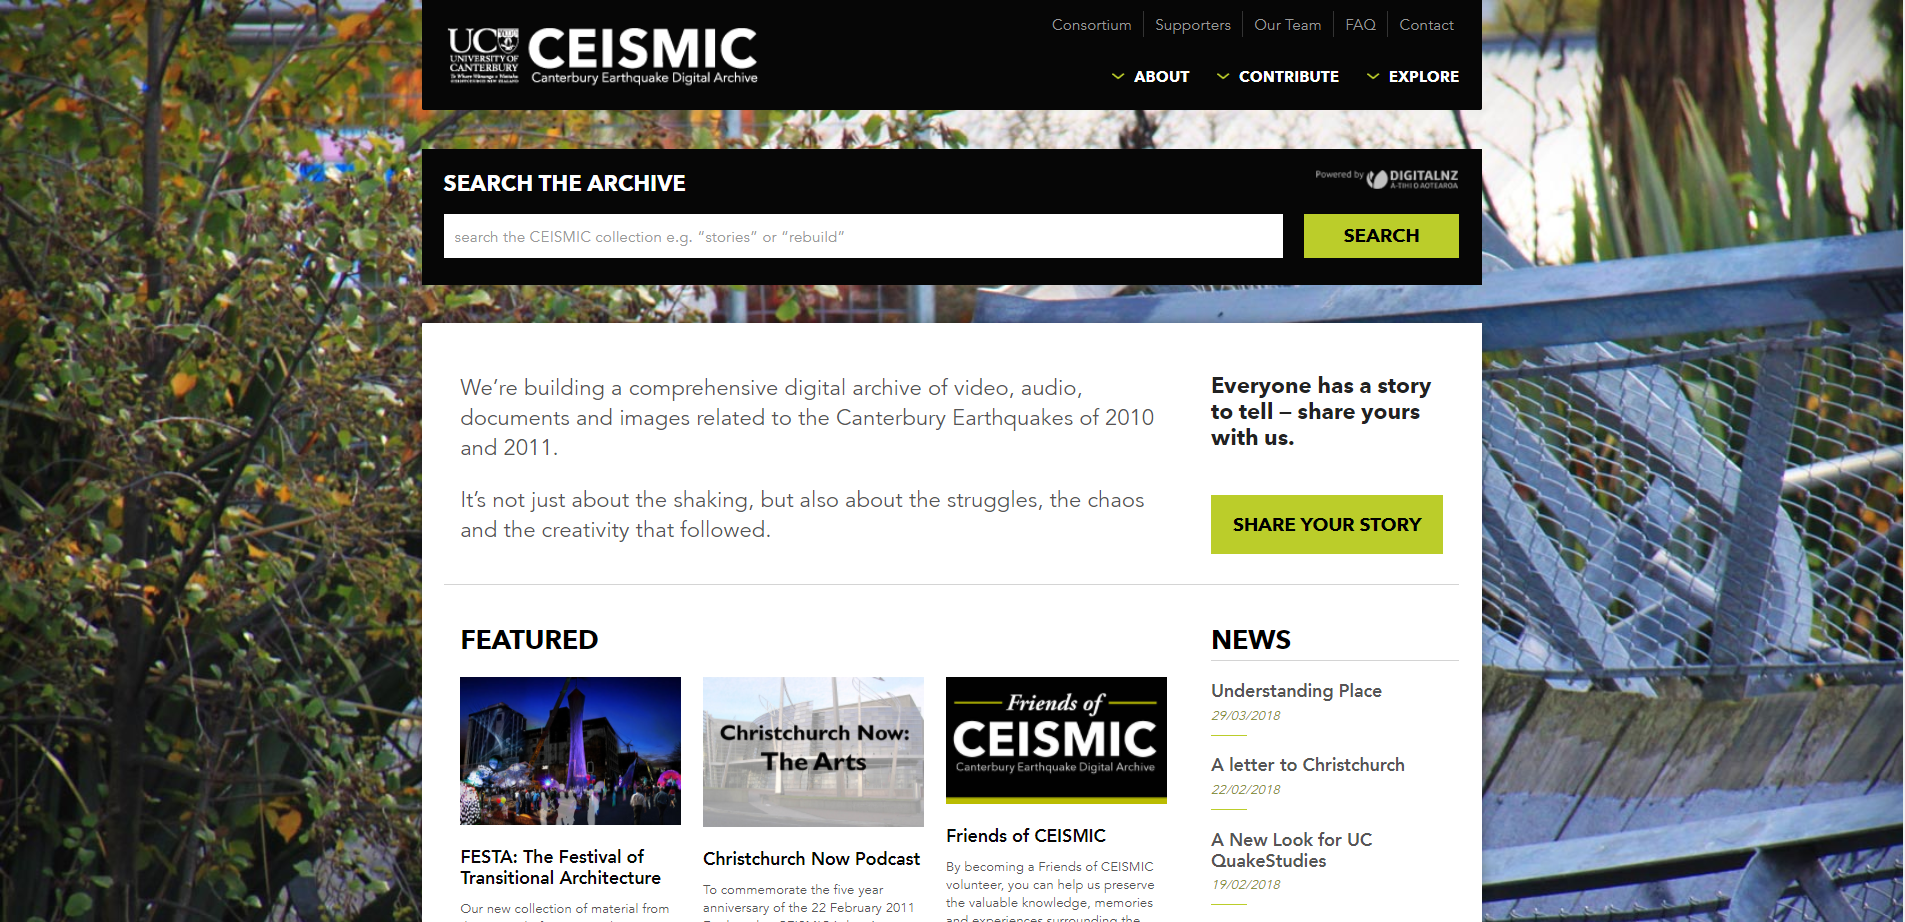 The homepage of the CEISMIC website